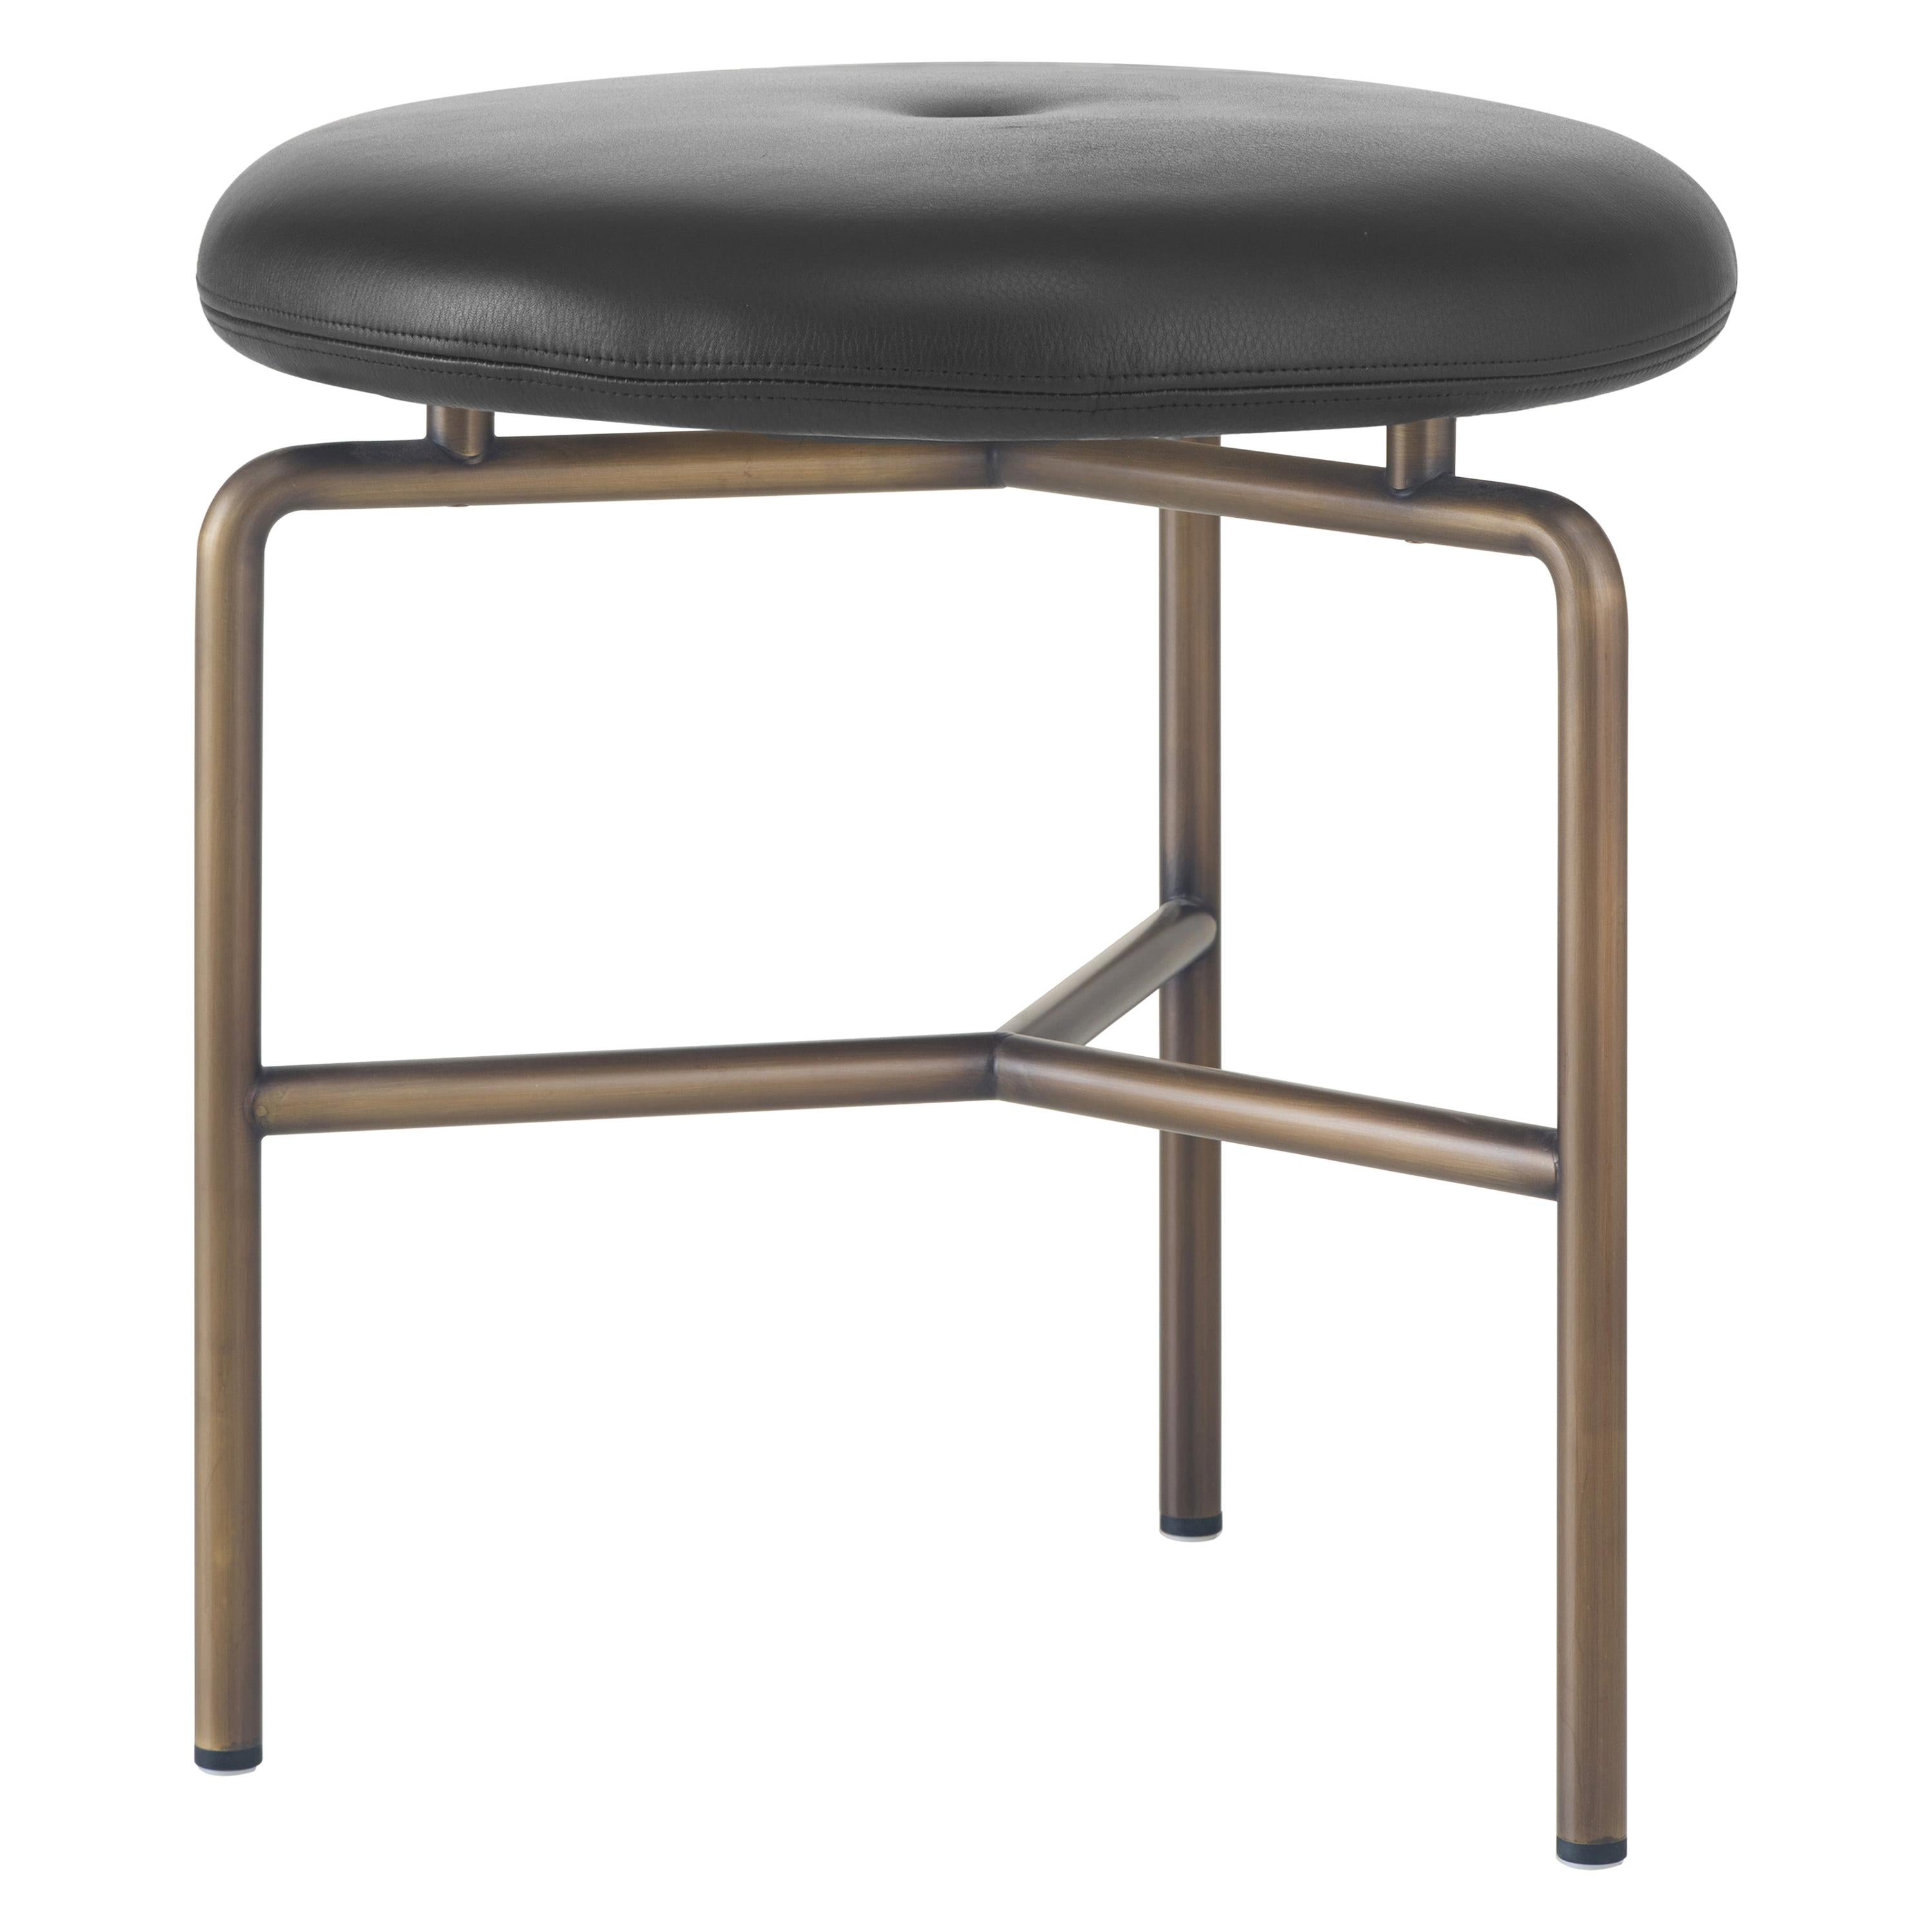 Circular Stool in Bronze and Leather Designed by Craig Bassam